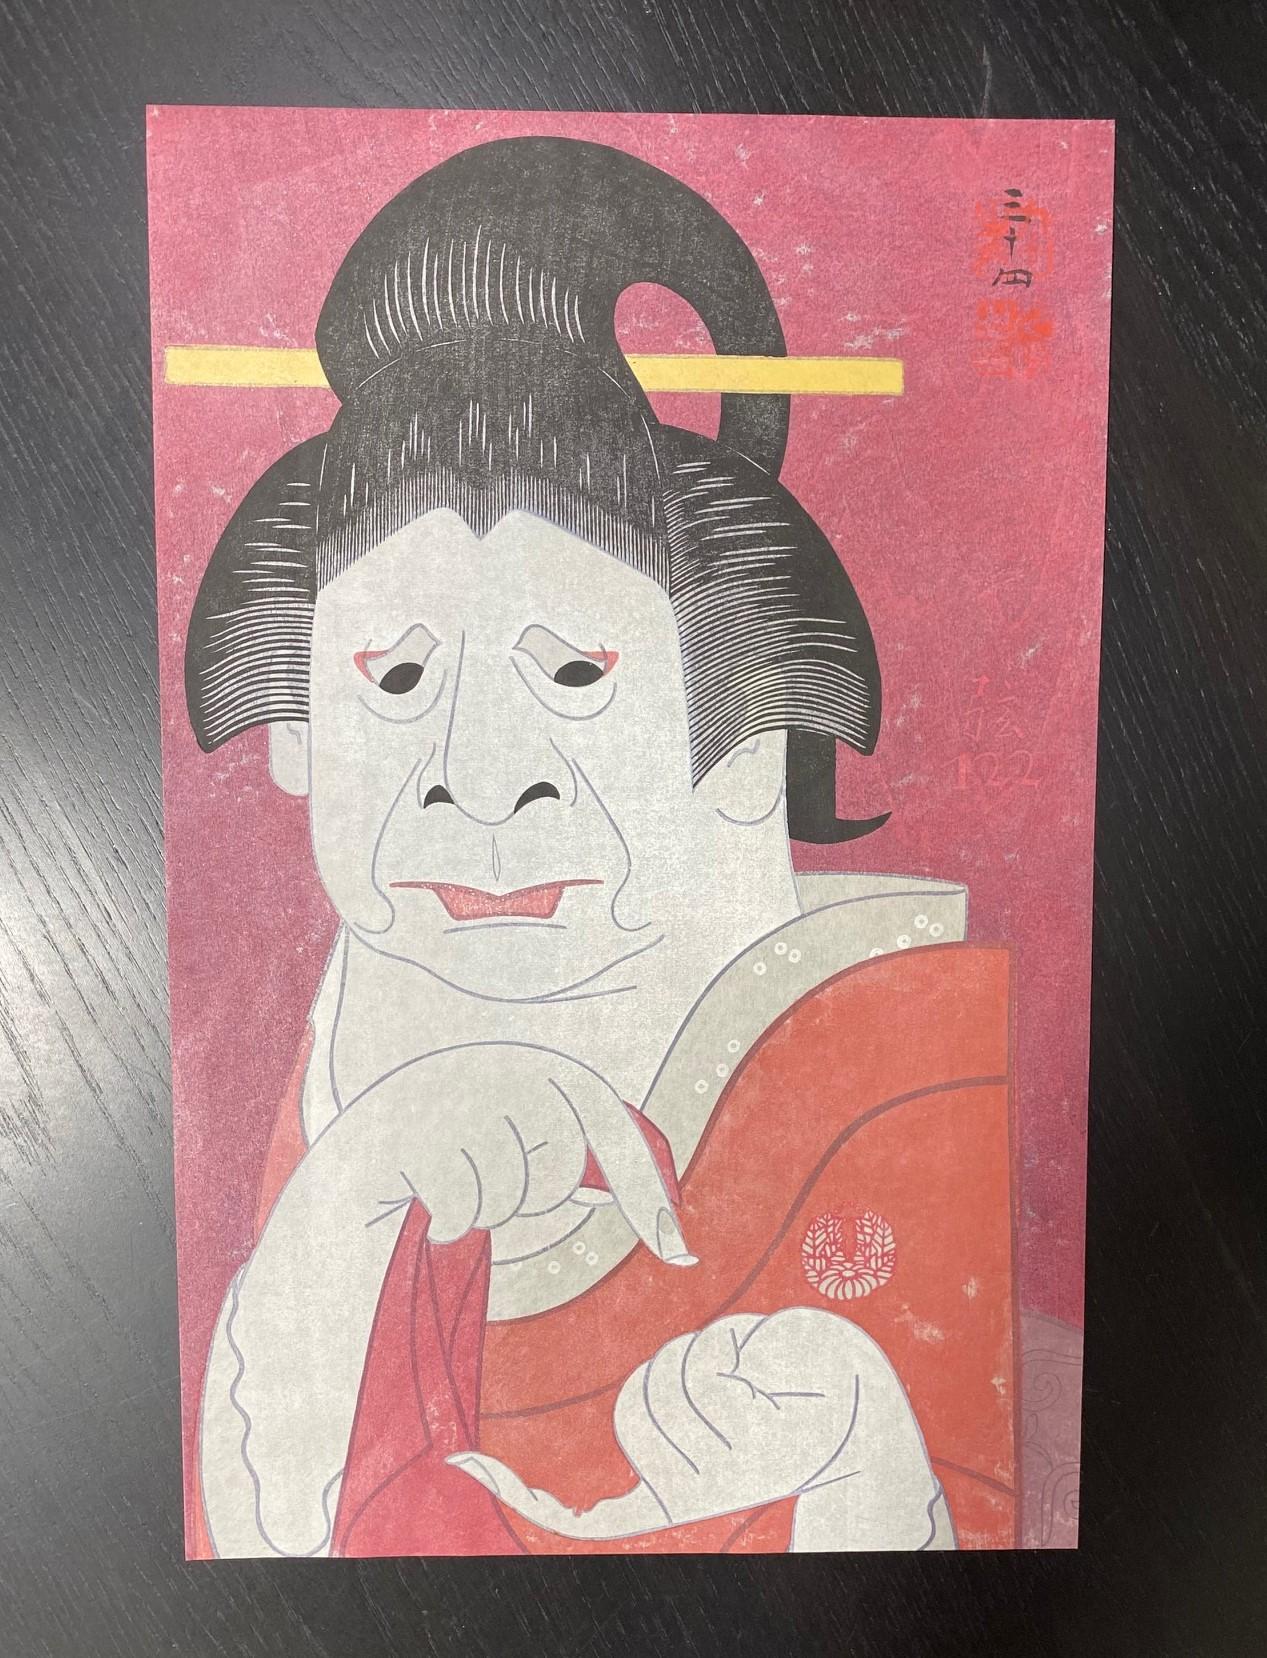 A wonderful and quite rare woodblock print by unique master Japanese artist/ printmaker Tsuruya Kokei. This work is titled 